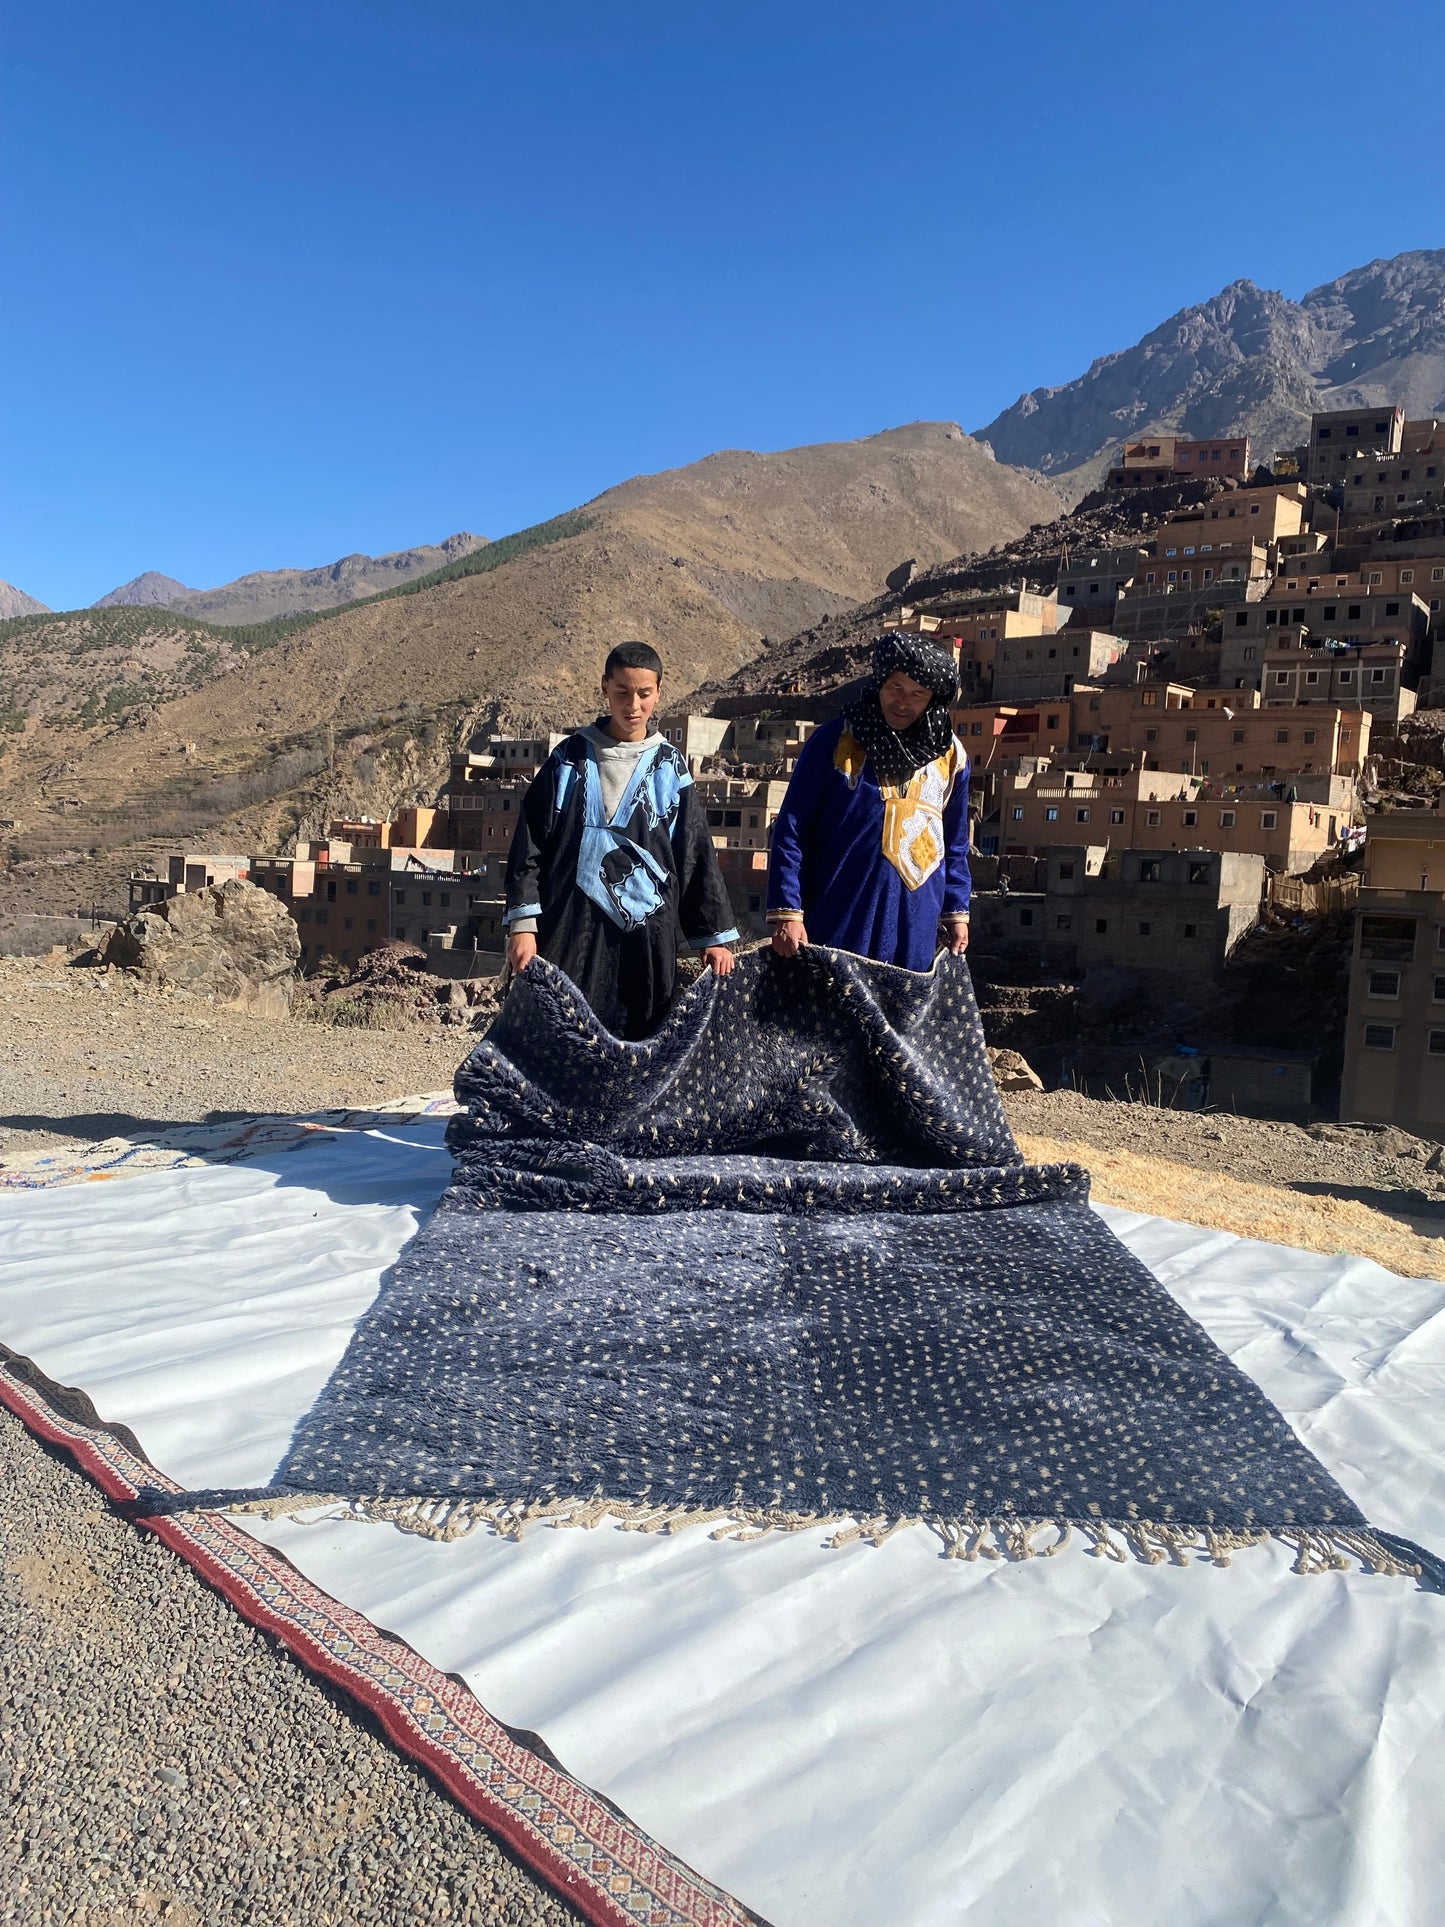 Beni Ourain rugs originate from the Atlas Mountains of Morocco and are characterized by their distinctive, neutral-toned, and geometric designs. These handwoven rugs often feature a plush pile and are made by the Berber tribes,  size is 320x190 cm